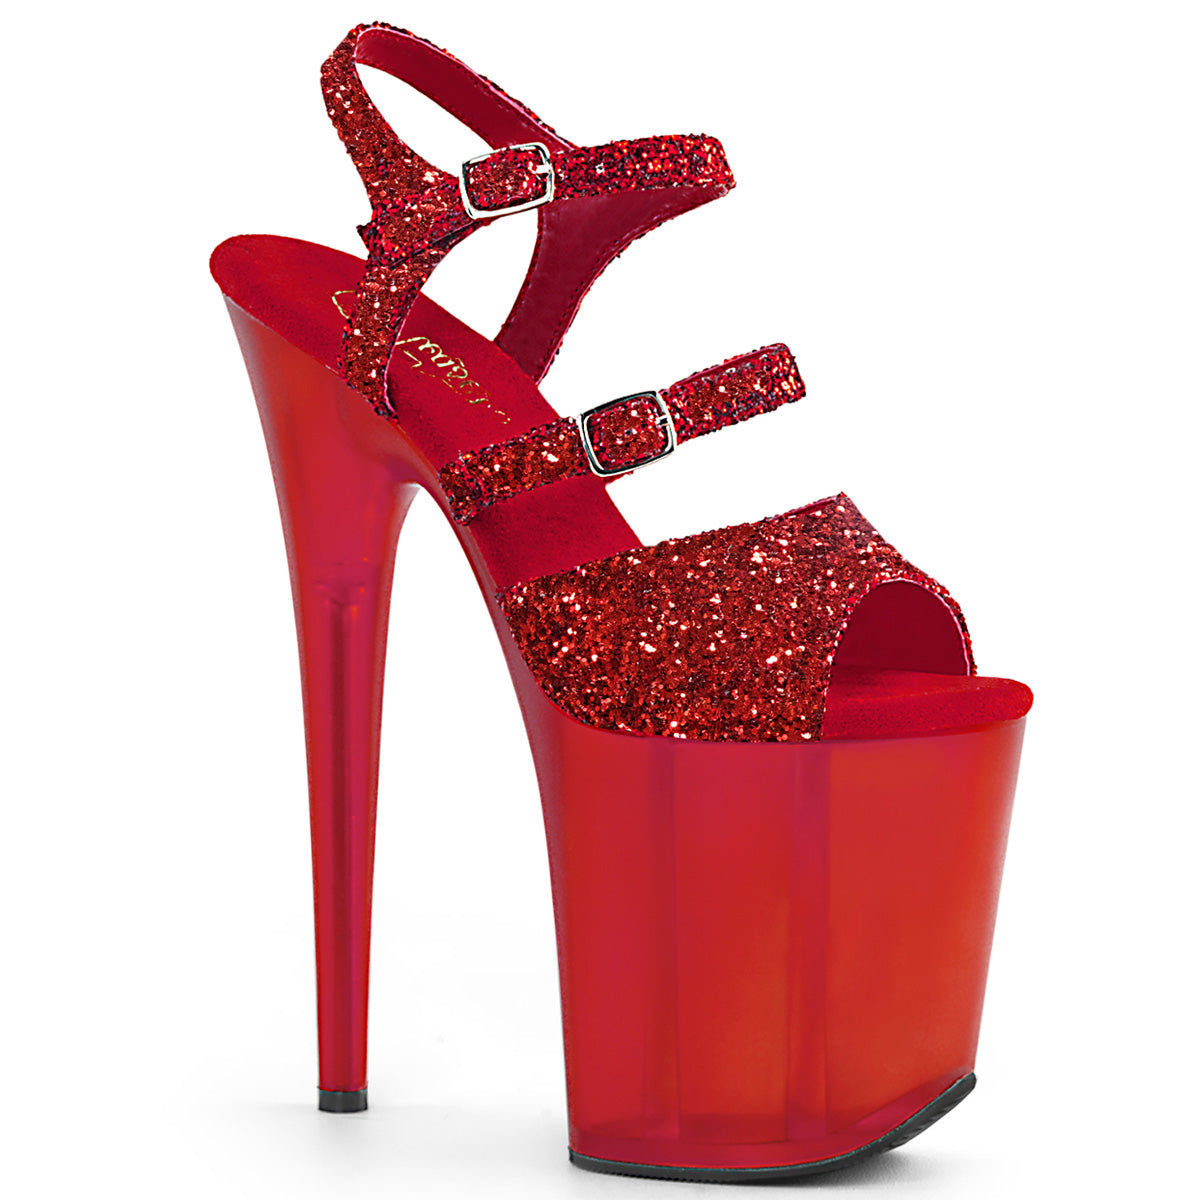 Pleaser Womens Sandals FLAMINGO-874 Red Glitter/Frosted Red